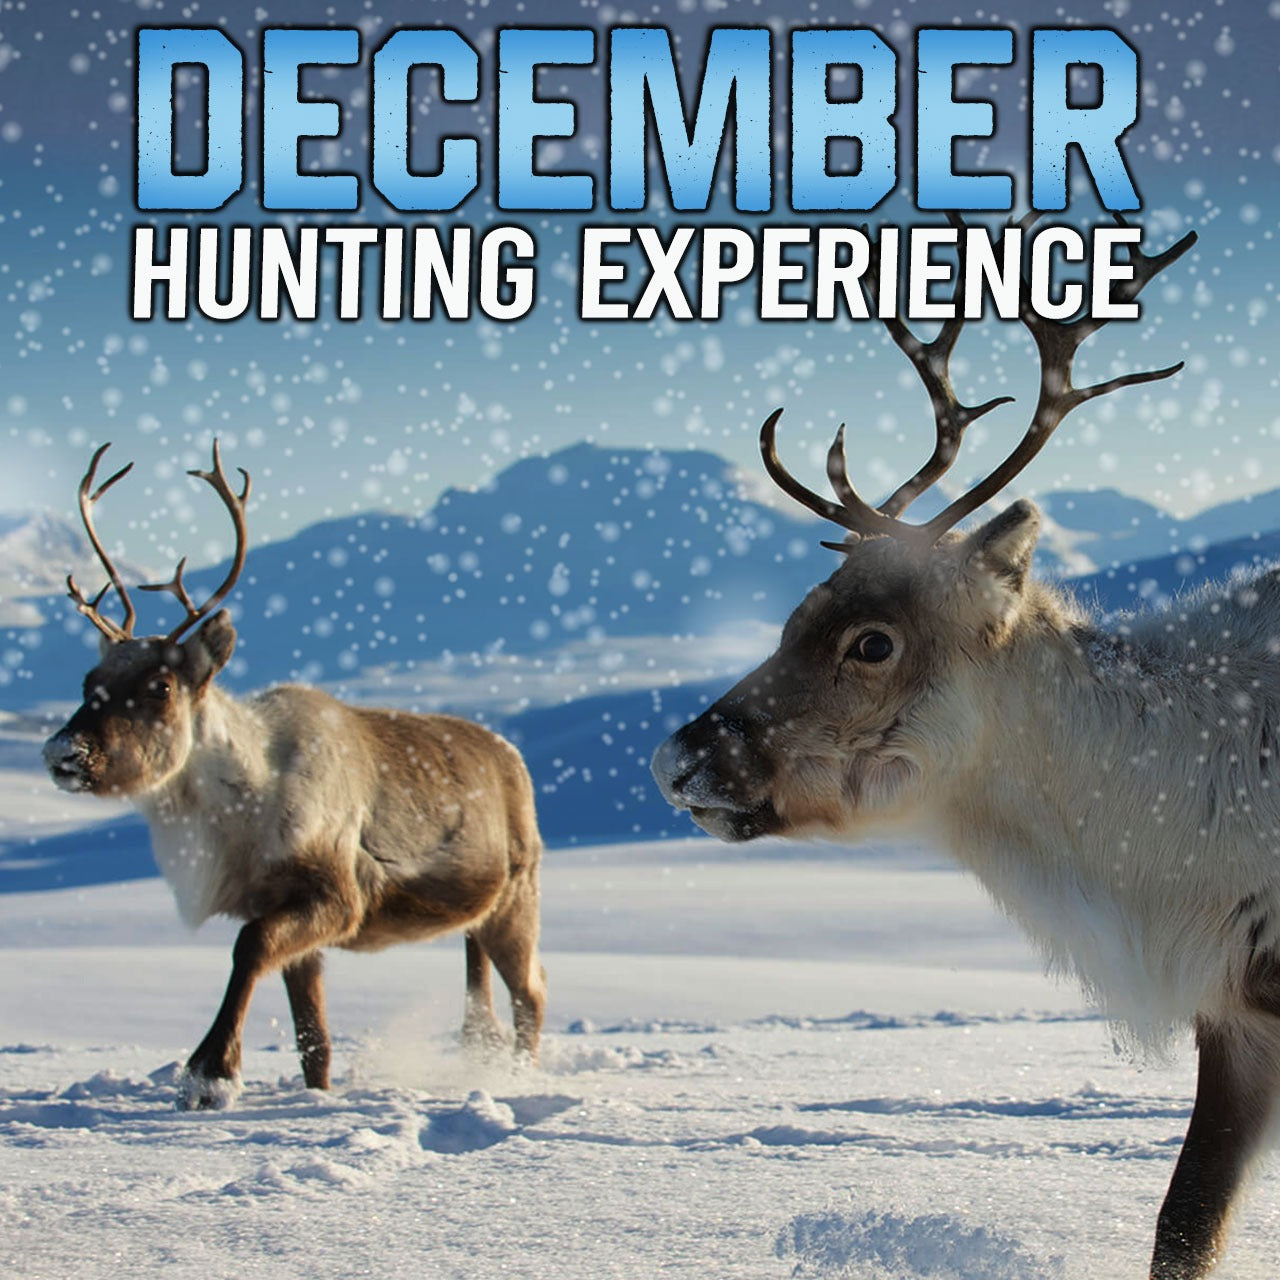 Decembe Hunting Experience!